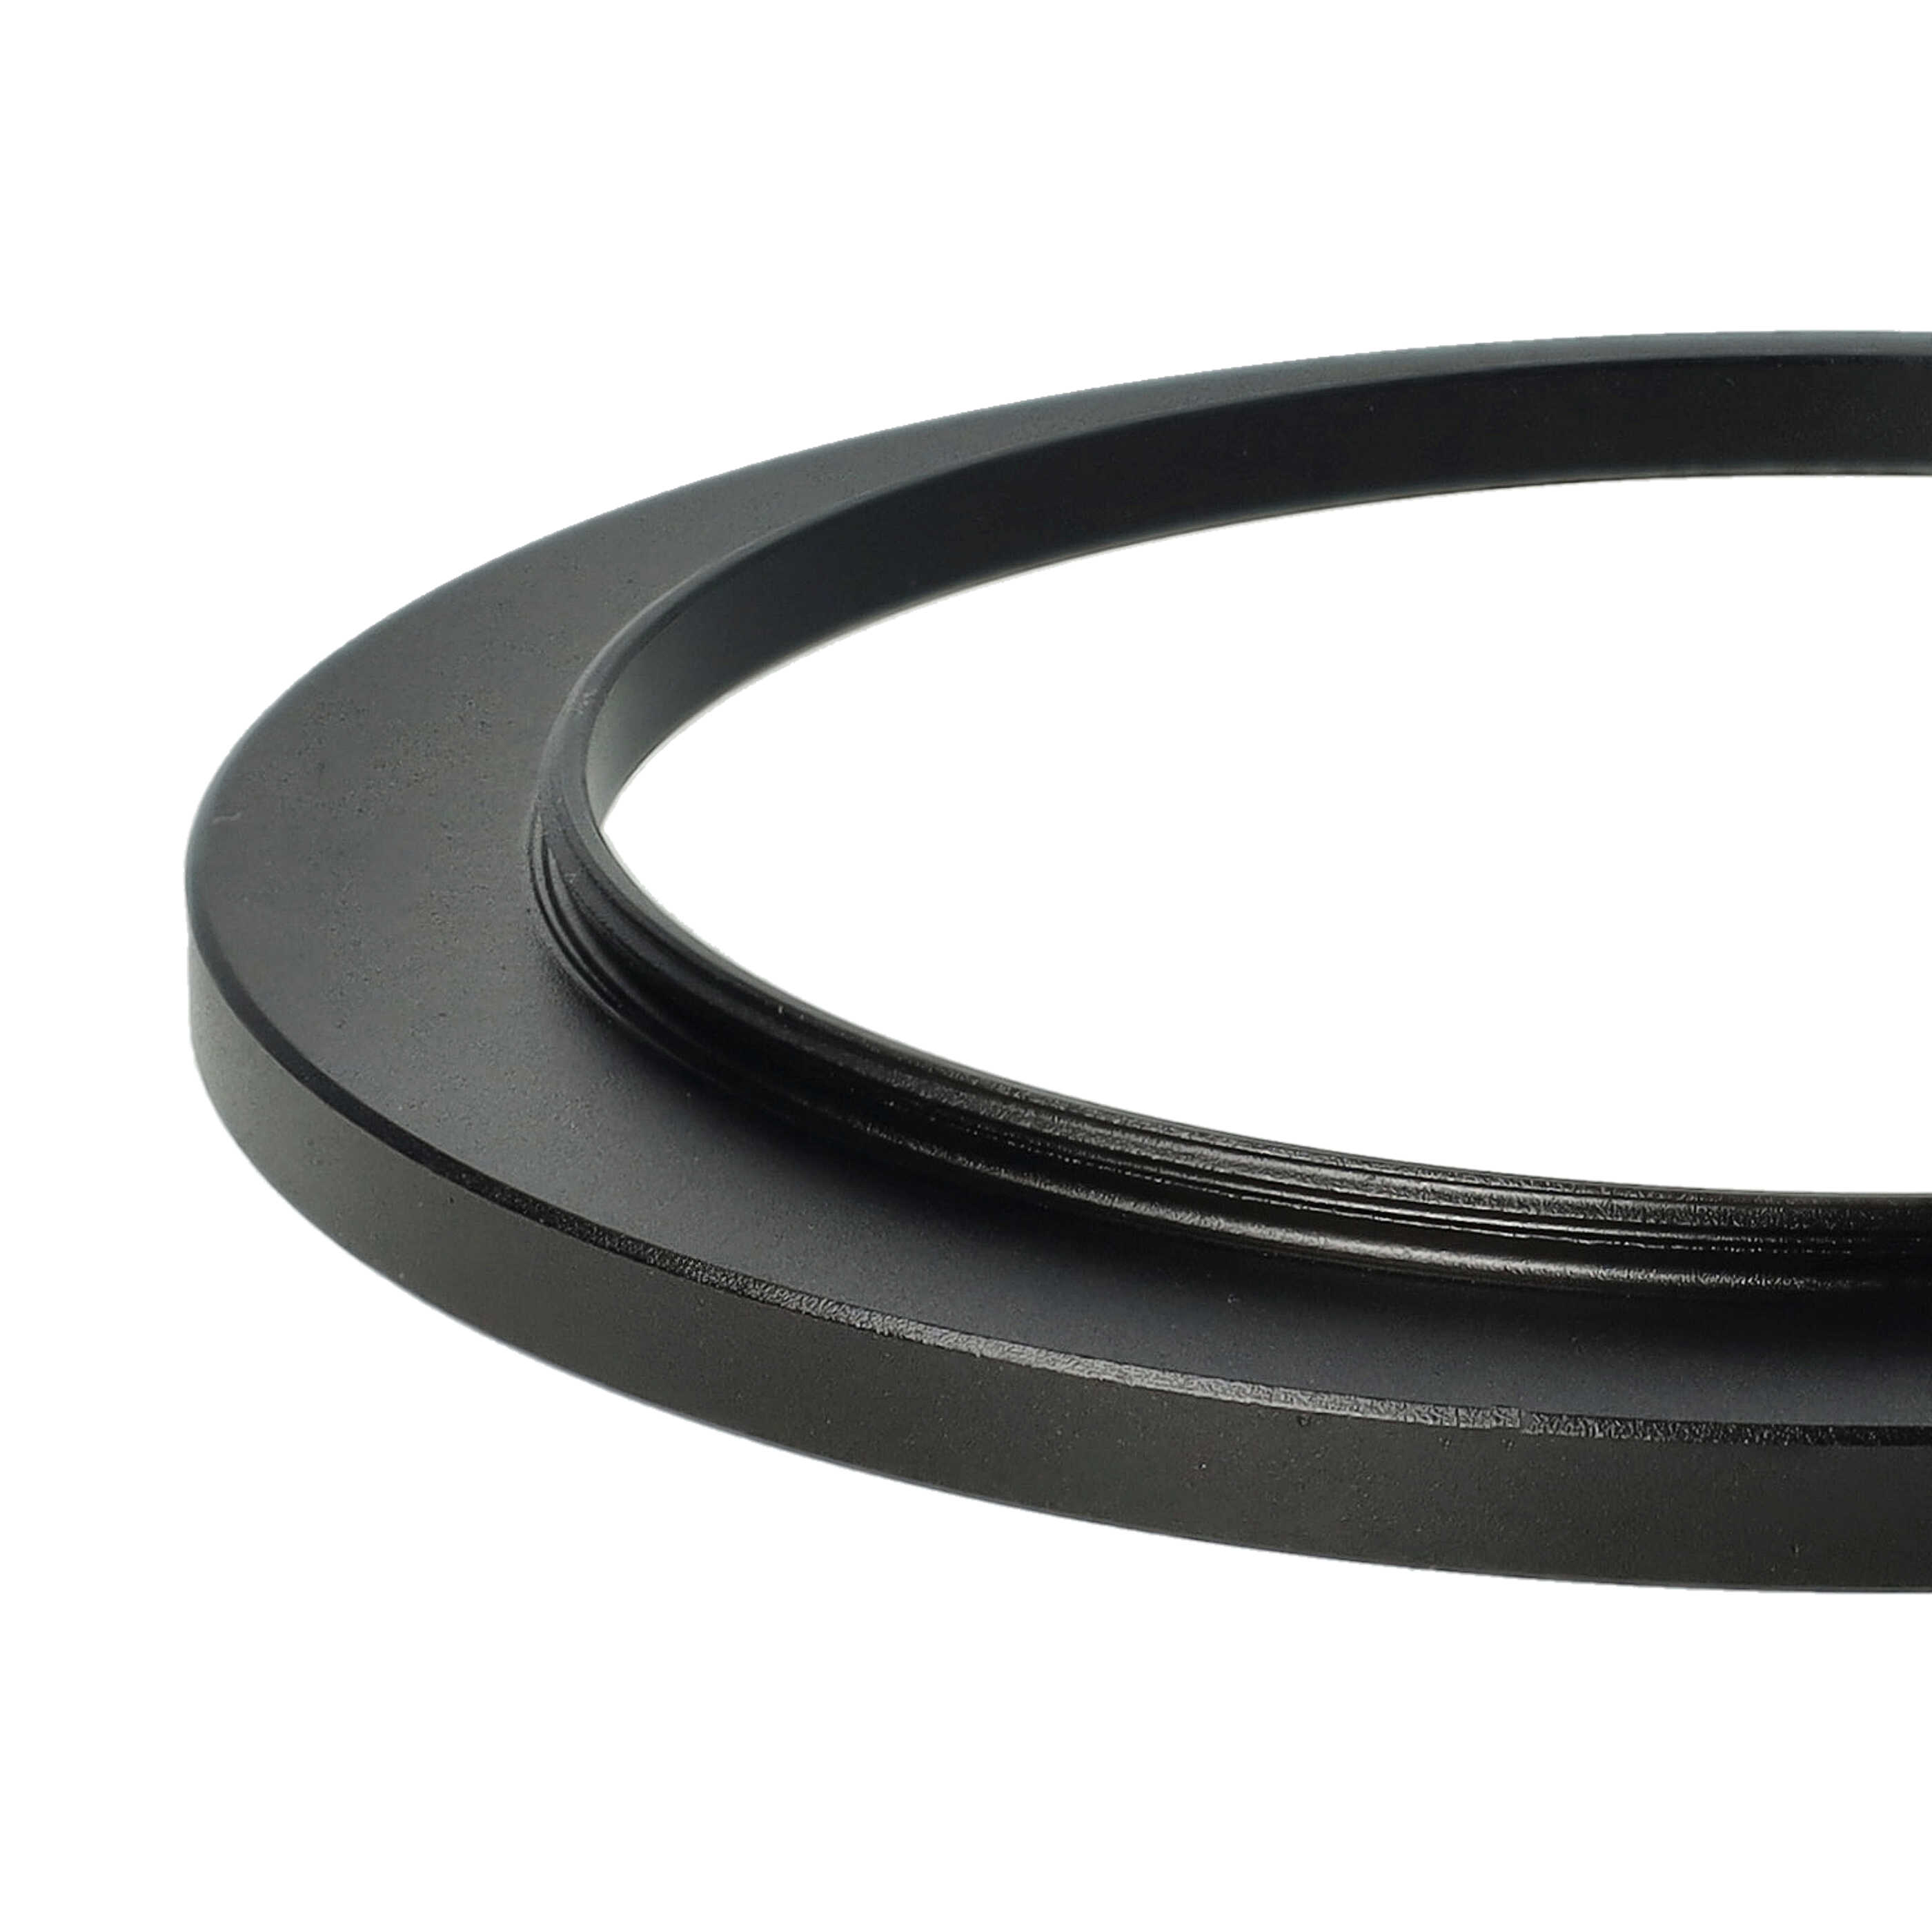 Step-Up Ring Adapter of 67 mm to 82 mmfor various Camera Lens - Filter Adapter